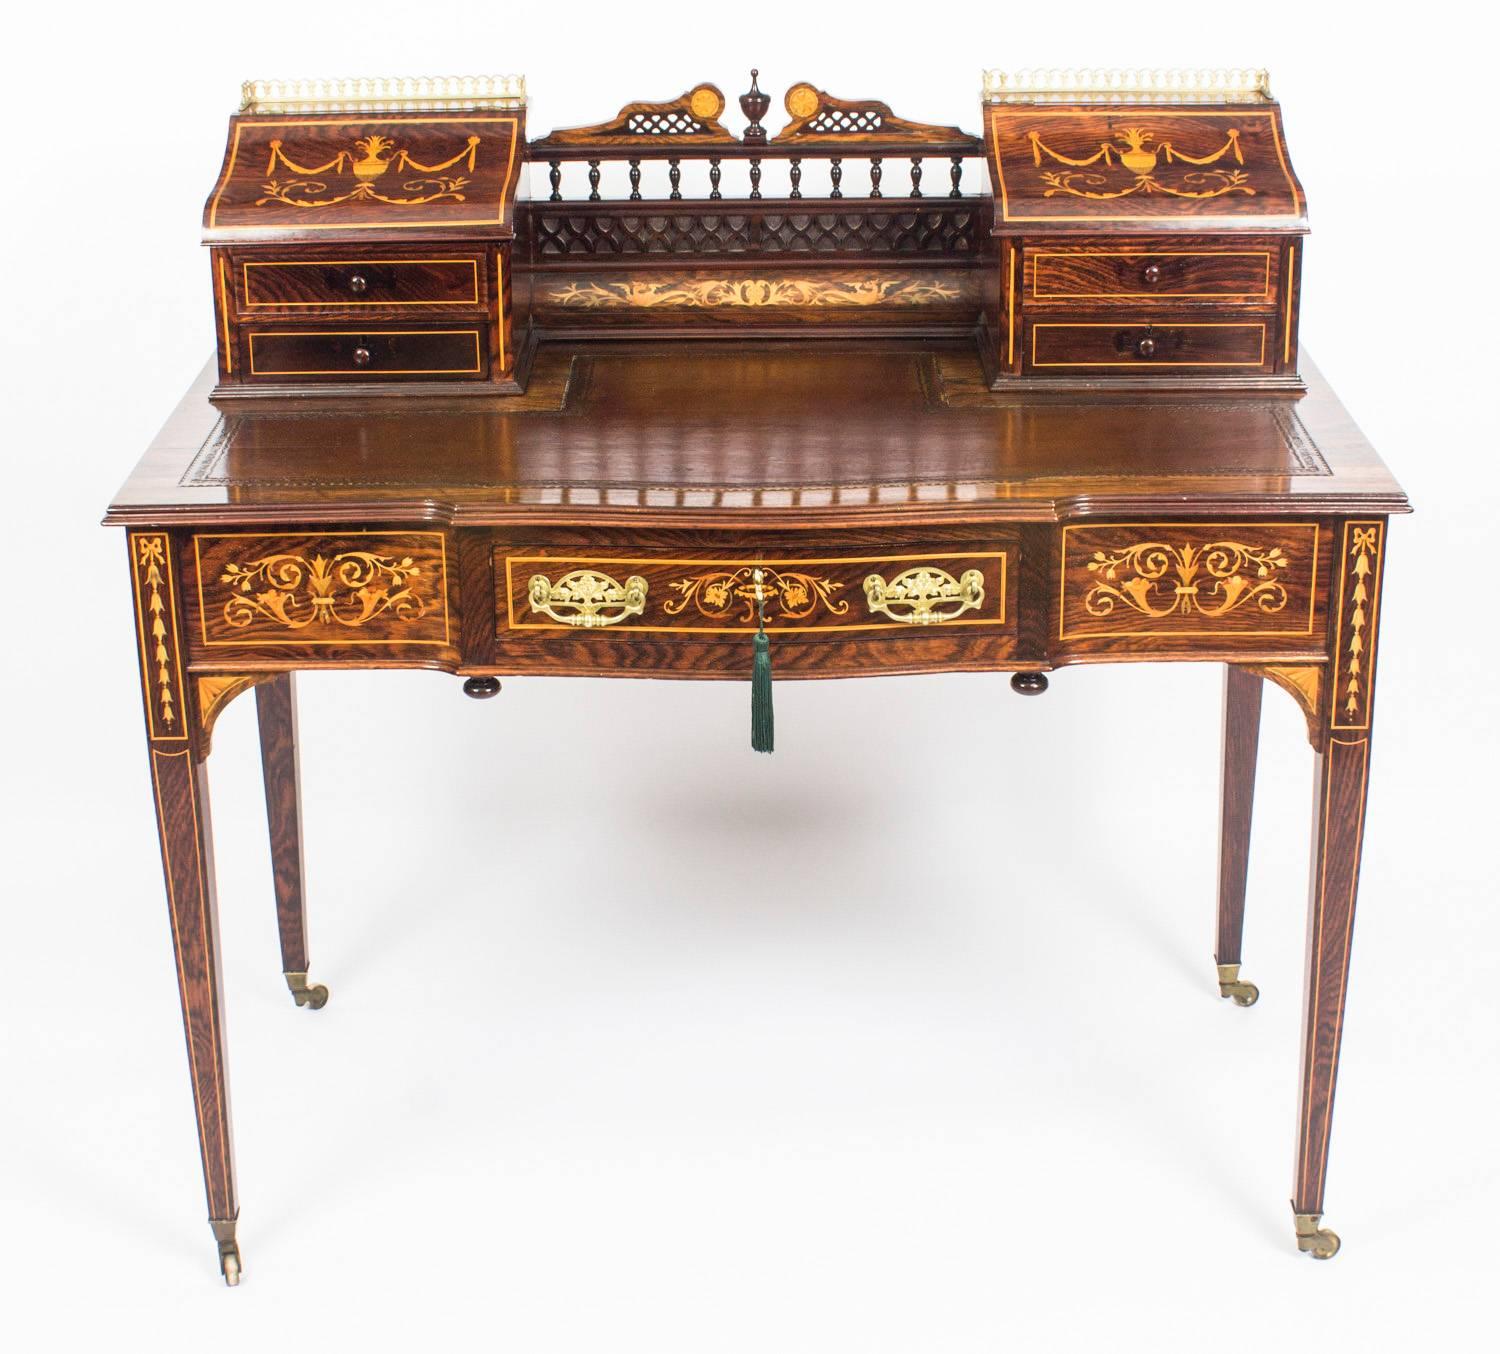 This is a beautiful antique Edwardian rosewood and marquetry Carlton House desk in the manner of the renowned retailer and manufacturer Edwards & Roberts, circa 1900 in date.

The desk is inlaid with a fabulous satinwood marquetry of ribbons,